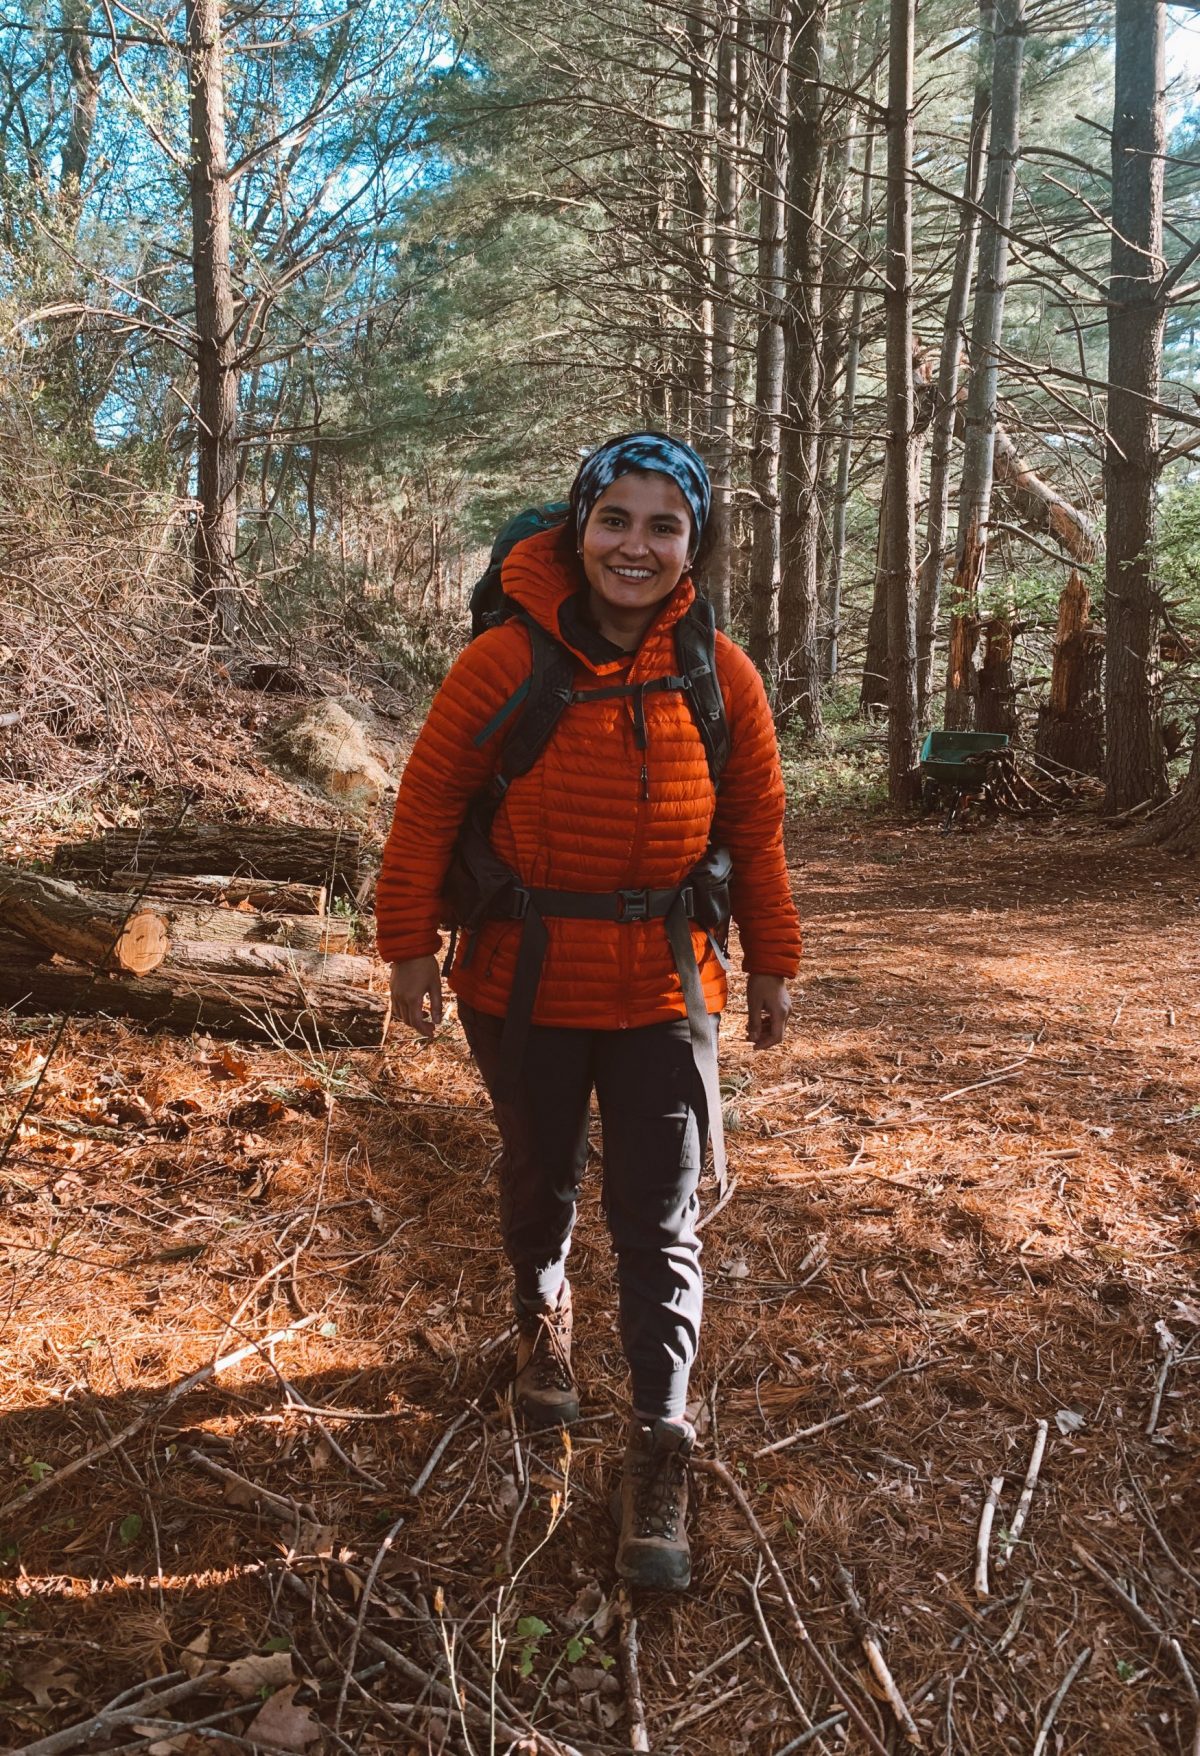 Maria with a backpack on in the woods